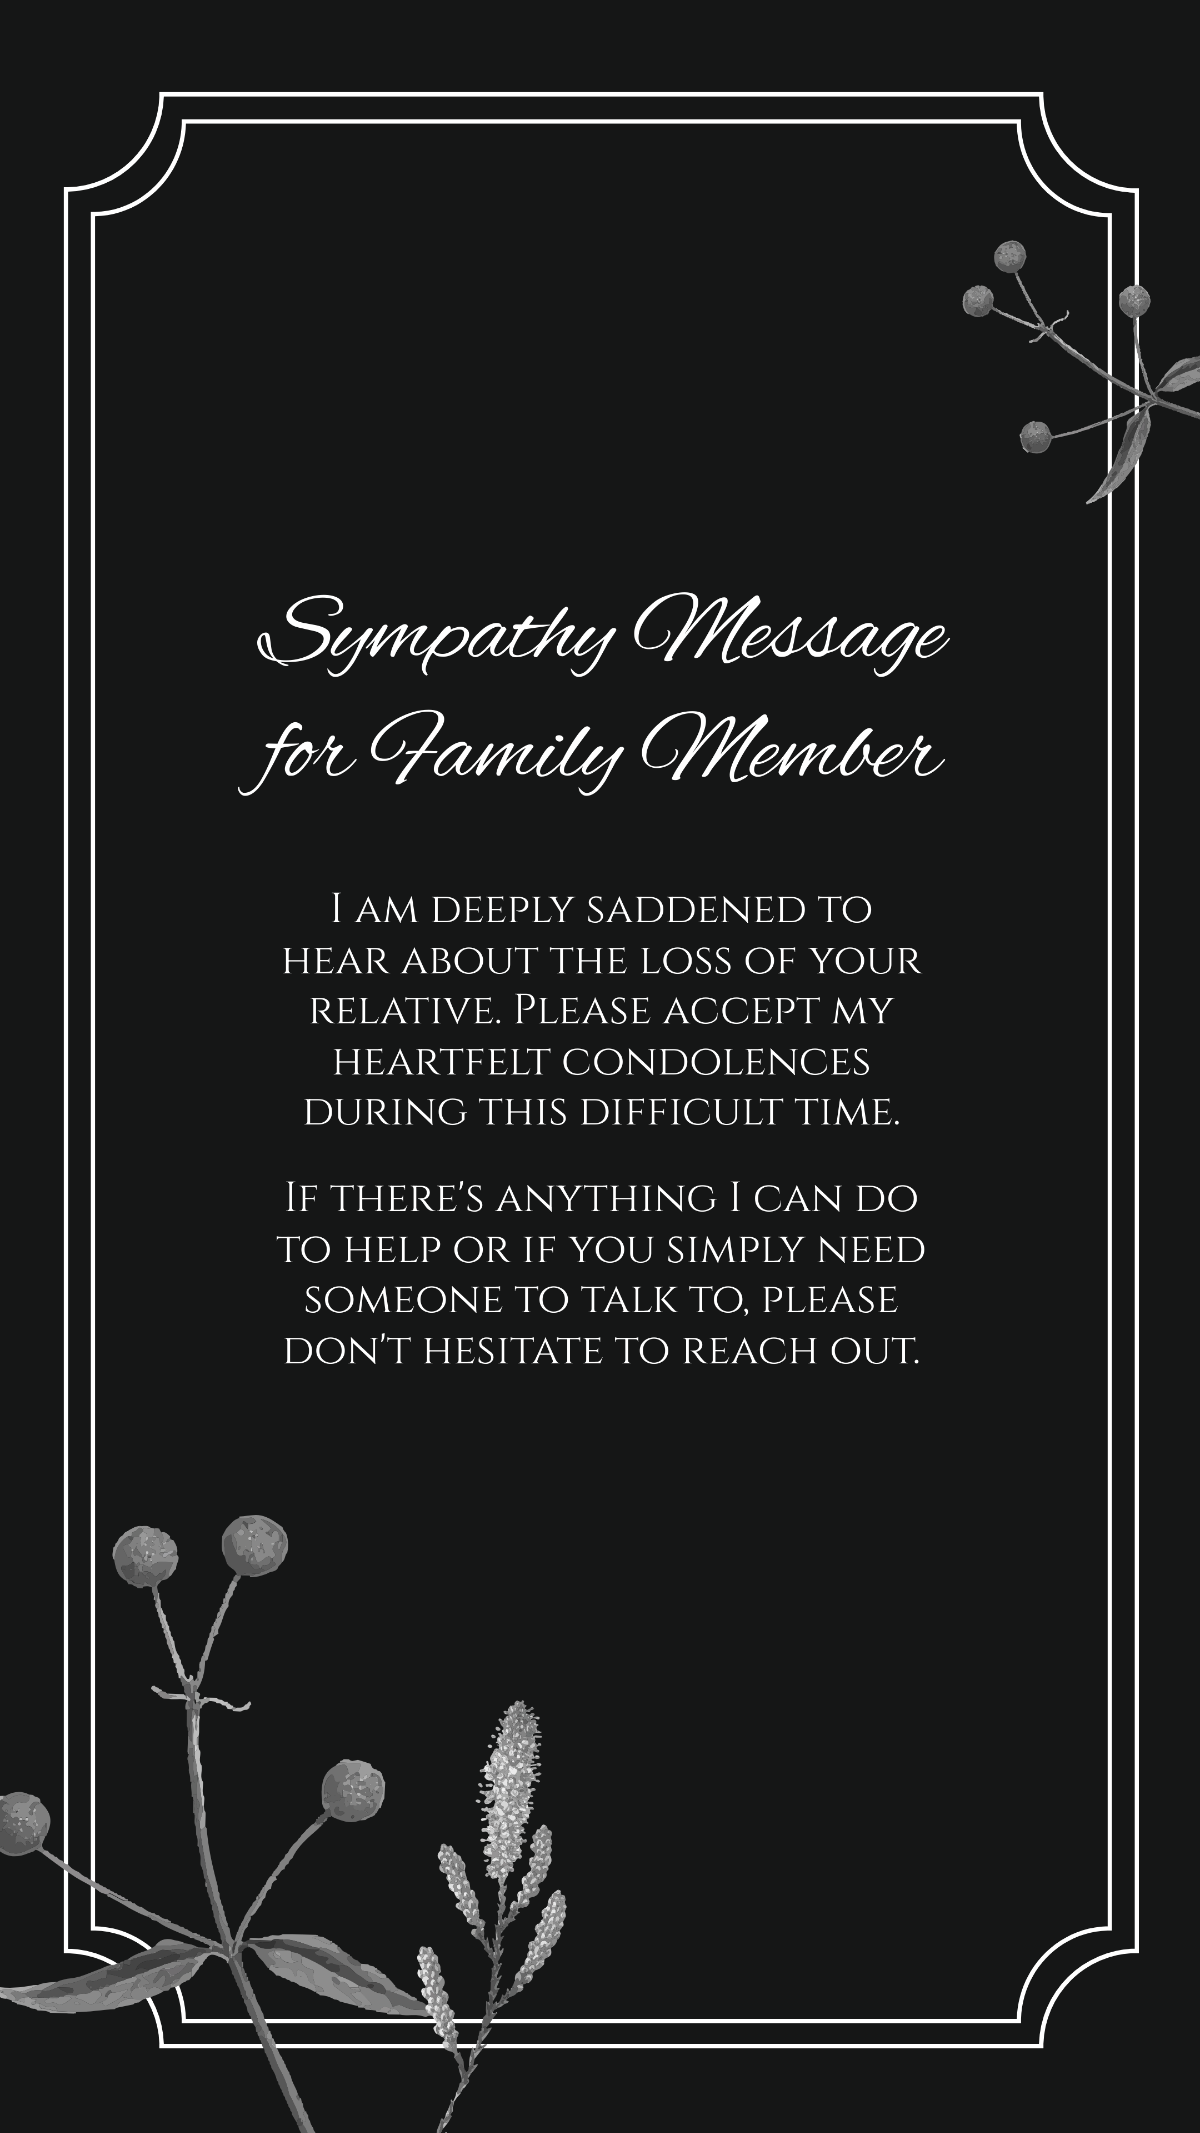 Sympathy message for Family Member Template